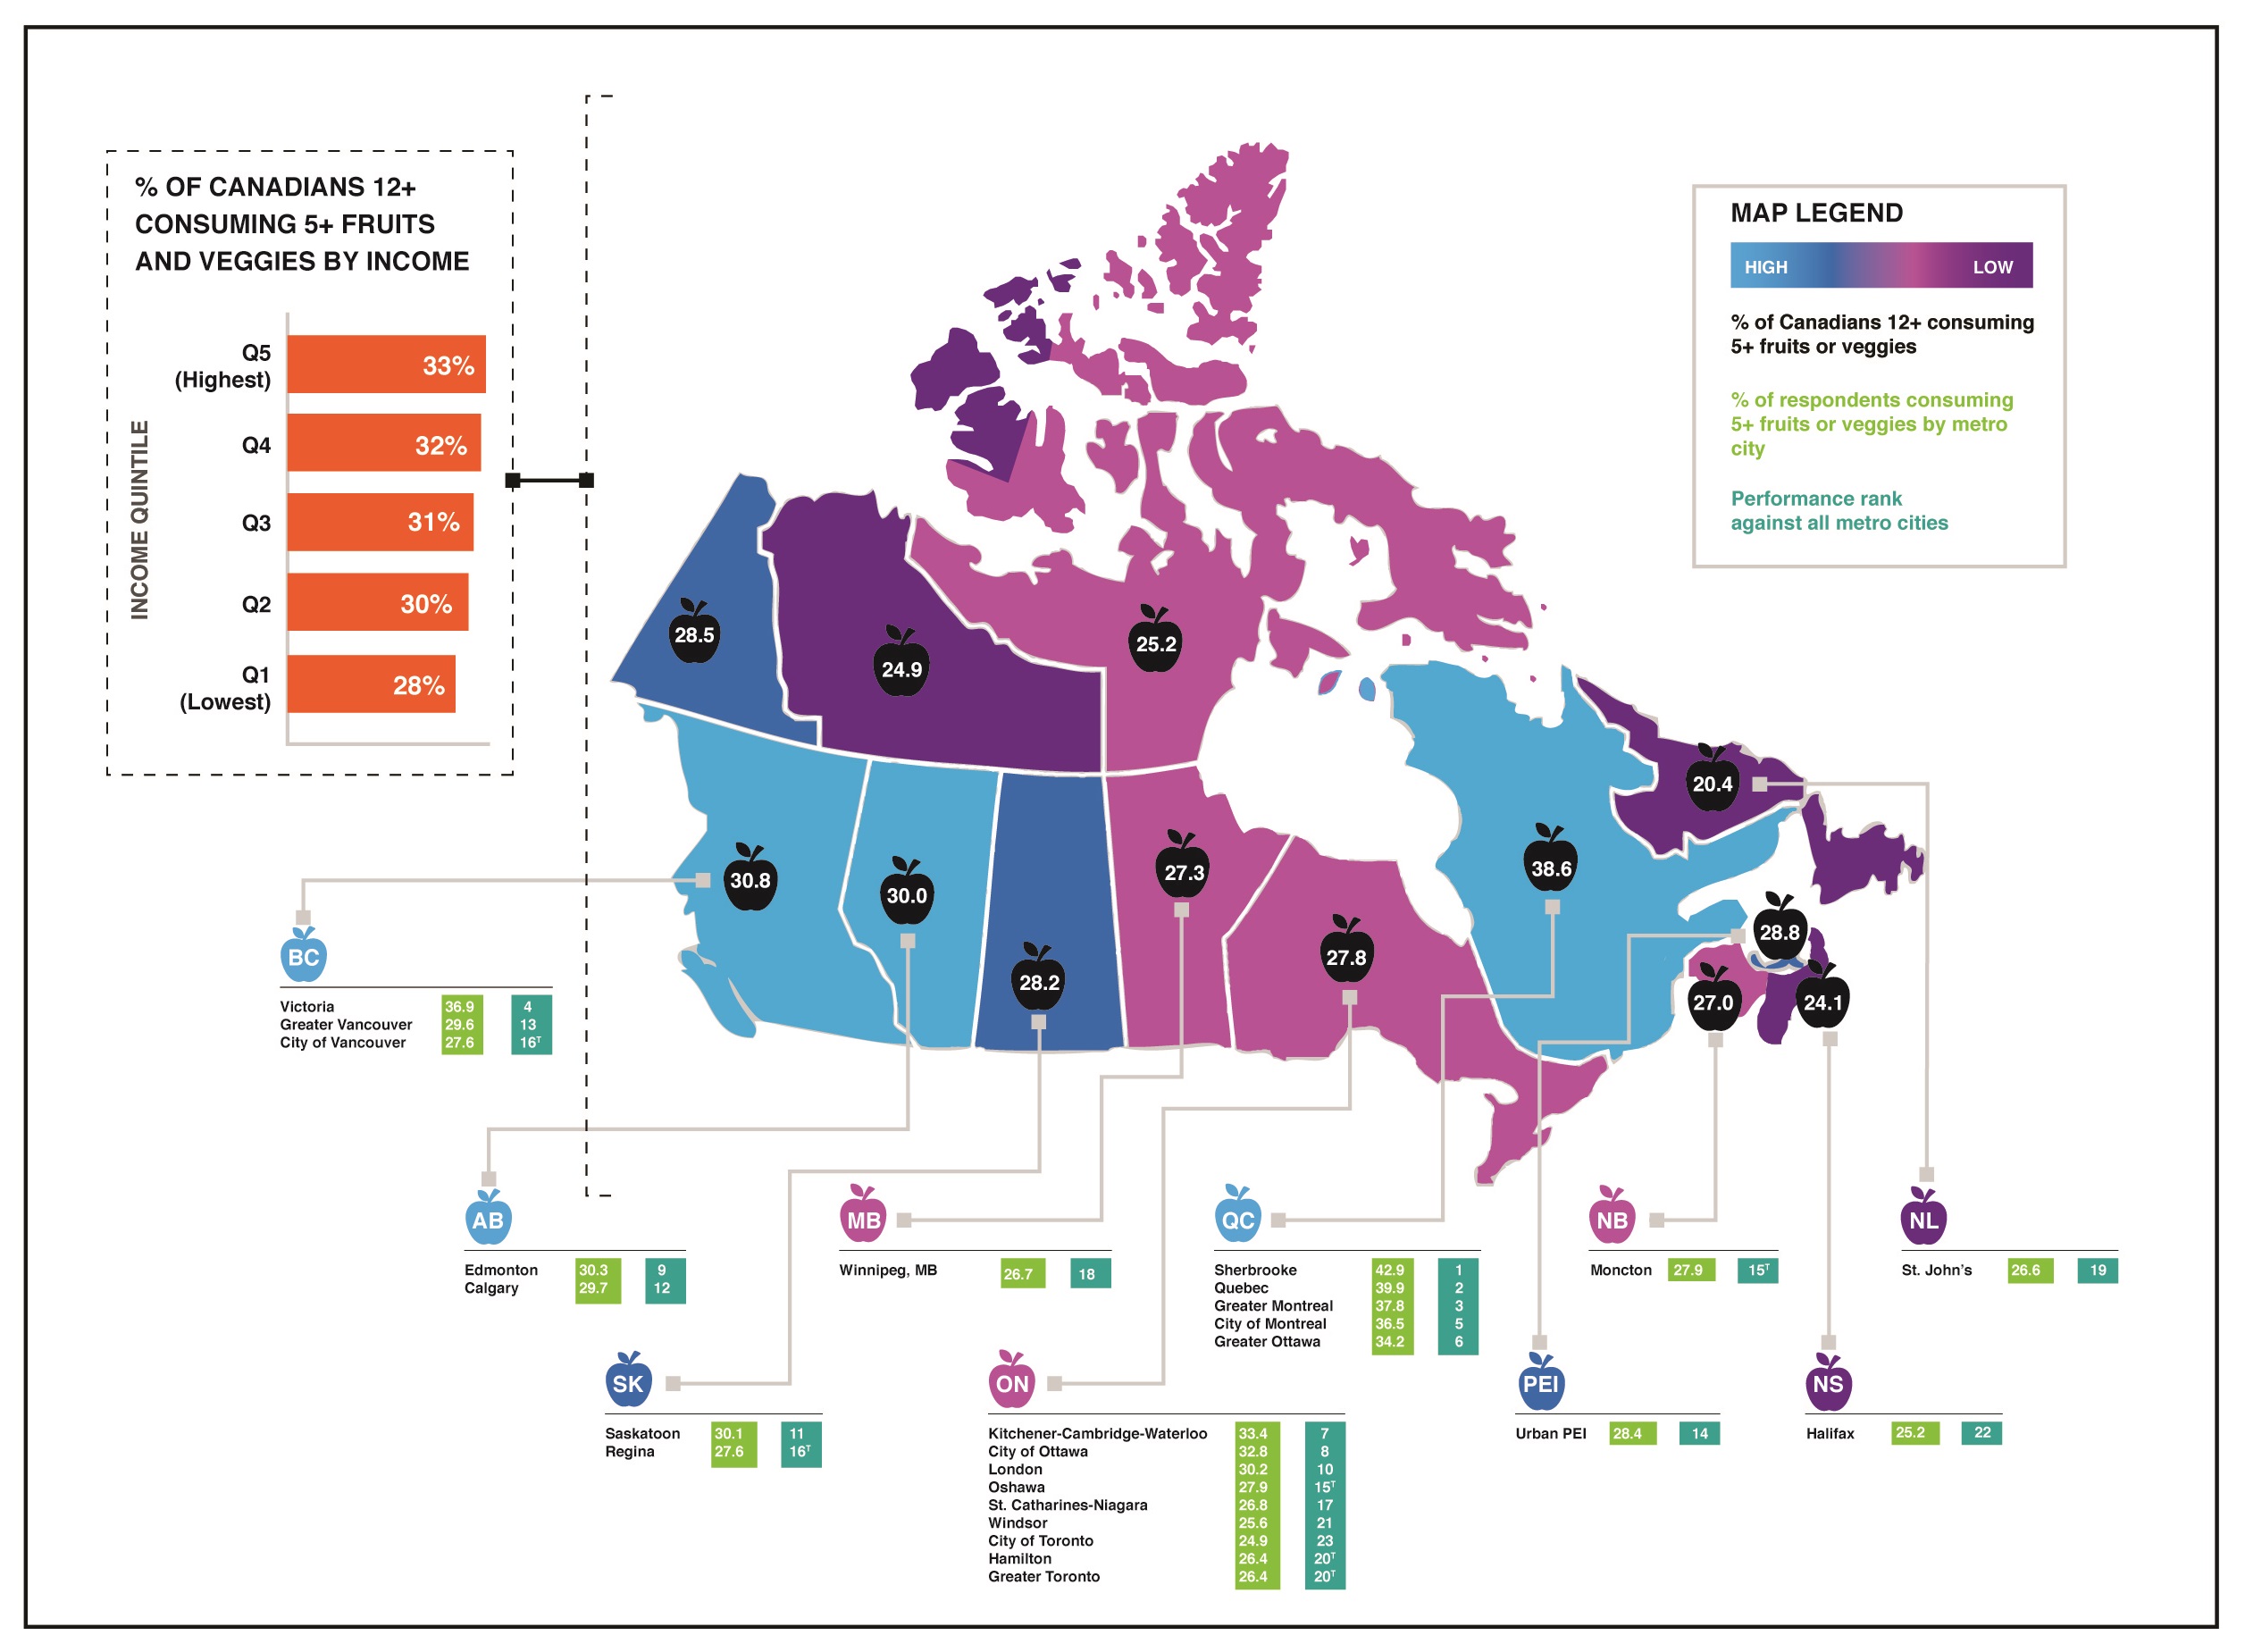 Map of Canada shows percentages broken down by both province or territory, and by 26 major cities (ranked), as follows: British Columbia: 30.8% province-wide; 36.9% in Victoria (ranked 4th); 29.6% in Greater Vancouver (ranked 13th); and 27.6% in City of Vancouver (ranked 16th). Alberta: 30% province-wide; 30.3% in Edmonton (ranked 9th); and 20.7% in Calgary (ranked 12th). Saskatchewan: 28.2% province-wide; 30.1% in Saskatoon (ranked 11th); and 27.6% in Regina (ranked 16th). Manitoba: 27.3% province-wide; 26.7% in Winnipeg (ranked 18th). Ontario: 27.8% province-wide; 33.4% in Kitchener-Cambridge-Waterloo (ranked 7th); 32.8% in Ottawa (ranked 8th); 30.2% in London (ranked 10th); 27.9% in Oshawa (ranked 15th); 26.8% in St. Catherines-Niagara (ranked 17th); 25.6% in Windsor (ranked 21st); 24.9% in City of Toronto (ranked 23rd); 26.4% in Hamilton (ranked 20th); and 26.4% in Greater Toronto (ranked 20th). Quebec: 38.6% province-wide; 42.9% in Sherbrooke Map of Canada shows percentages broken down by both province or territory, and by 26 major cities (ranked), as follows: British Columbia: 56.8% province-wide; 58.5% in Victoria (ranked 8th); 52.1% in Greater Vancouver (ranked 2nd); and 45.2% in City of Vancouver (ranked 1st). Alberta: 65.1% province-wide; 64.6% in Edmonton (ranked 18th); and 62.7% in Calgary (ranked 14th). Saskatchewan: 69.7% province-wide; 66.1% in Saskatoon (ranked 22nd); and 69.1% in Regina (ranked 25th). Manitoba: 64.6% province-wide; 61% in Winnipeg (ranked 12th). Ontario: 61.4% province-wide; 63.5% in Kitchener-Cambridge-Waterloo (ranked 15th); 60% in Ottawa (ranked 10th); 59.5% in London (ranked 9th); 64% in Oshawa (ranked 16th); 64.9% in St. Catherines-Niagara (ranked 20th); 65.9% in Windsor (ranked 21st); 53.1% in City of Toronto (ranked 3rd); 64.5% in Hamilton (ranked 17th); and 56.4% in Greater Toronto (ranked 5th). Quebec: 60.7% province-wide; 60.1% in Sherbrooke (ranked 11th); 57.4% in Quebec City (ranked 6th); 58% in Greater Montreal (ranked 7th); 55.2% in City of Montreal (ranked 4th); and 61.5% in Greater Ottawa (ranked 13th). New Brunswick: 73.1% province-wide; and 76.1% in Moncton (ranked 26th). Nova Scotia: 69.4% province wide; and 64.8% in Halifax (ranked 19th). Prince Edward Island: 70.8% province-wide; and 69% in Urban PEI (ranked 24th). Newfoundland & Labrador: 73% province-wide; and 67.5% in St. John's (ranked 23rd). Yukon Territory: 67.4% territory-wide Northwest Territories: 72.5% territory-wide Nunavut: 62.4% territory-wide (ranked 1st); 39.9% in Quebec City (ranked 2nd); 37.8% in Greater Montreal (ranked 3rd); 36.5% in City of Montreal (ranked 5th); and 34.2% in Greater Ottawa (ranked 6th). New Brunswick: 27% province-wide; and 27.9% in Moncton (ranked 15th). Nova Scotia: 24.1% province wide; and 25.2% in Halifax (ranked 22nd). Prince Edward Island: 28.8% province-wide; and 28.4% in Urban PEI (ranked 14th). Newfoundland & Labrador: 20.4% province-wide; and 26.6% in St. John's (ranked 19th). Yukon Territory: 28.5% territory-wide Northwest Territories: 24.9% territory-wide Nunavut: 25.2% territory-wide Graphic also features a bar-chart showing percentage of consumption by income quintile: Q1 (lowest income): 28% Q2: 30% Q3: 31% Q4: 32% Q5 (highest income): 33%